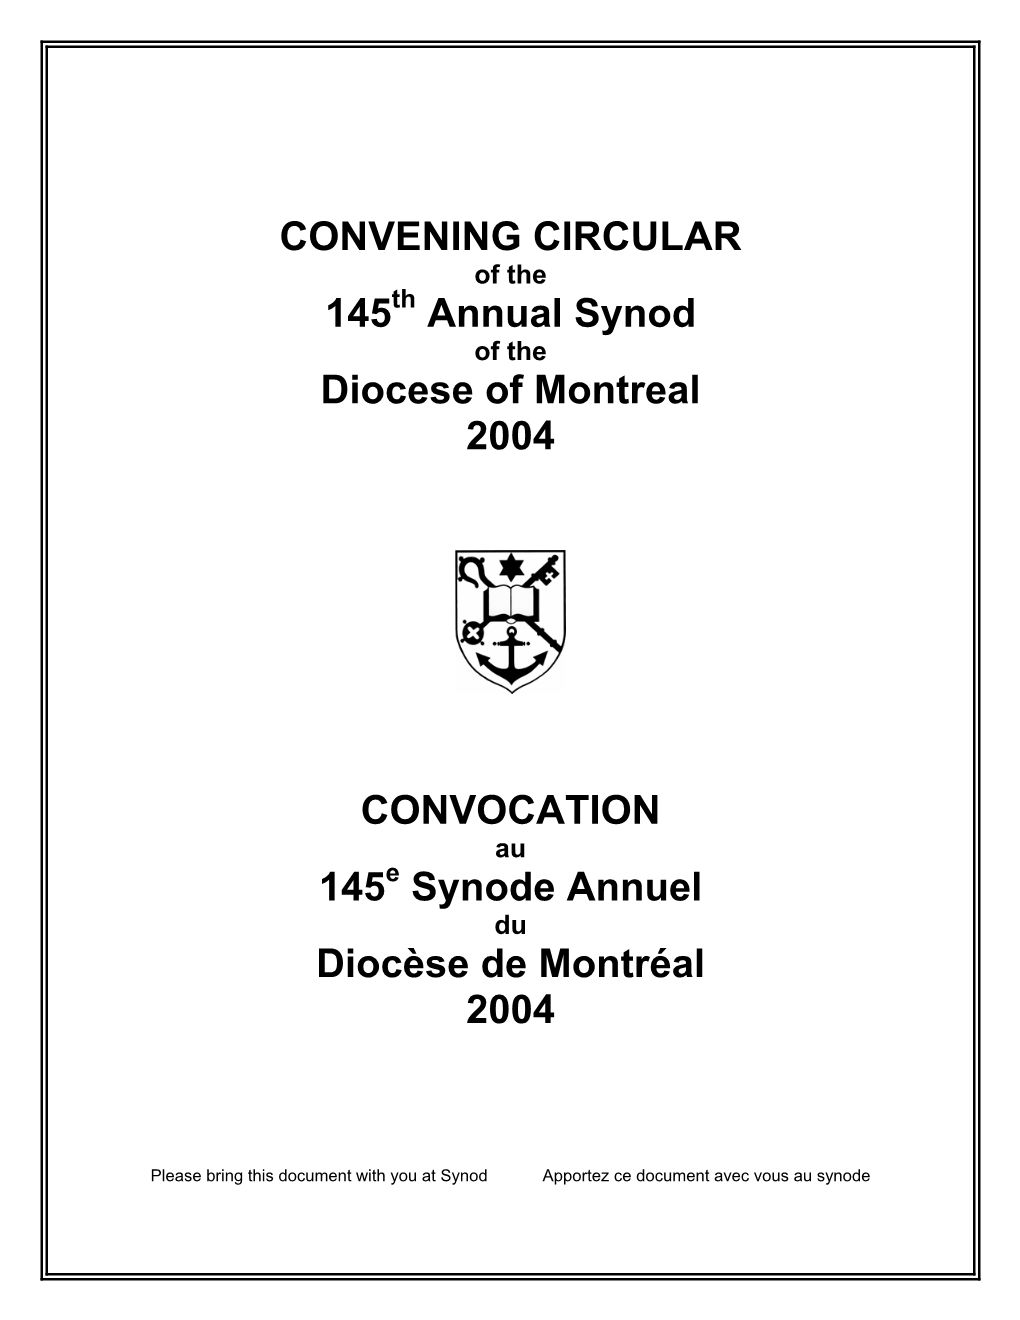 CONVENING CIRCULAR 145 Annual Synod Diocese of Montreal 2004